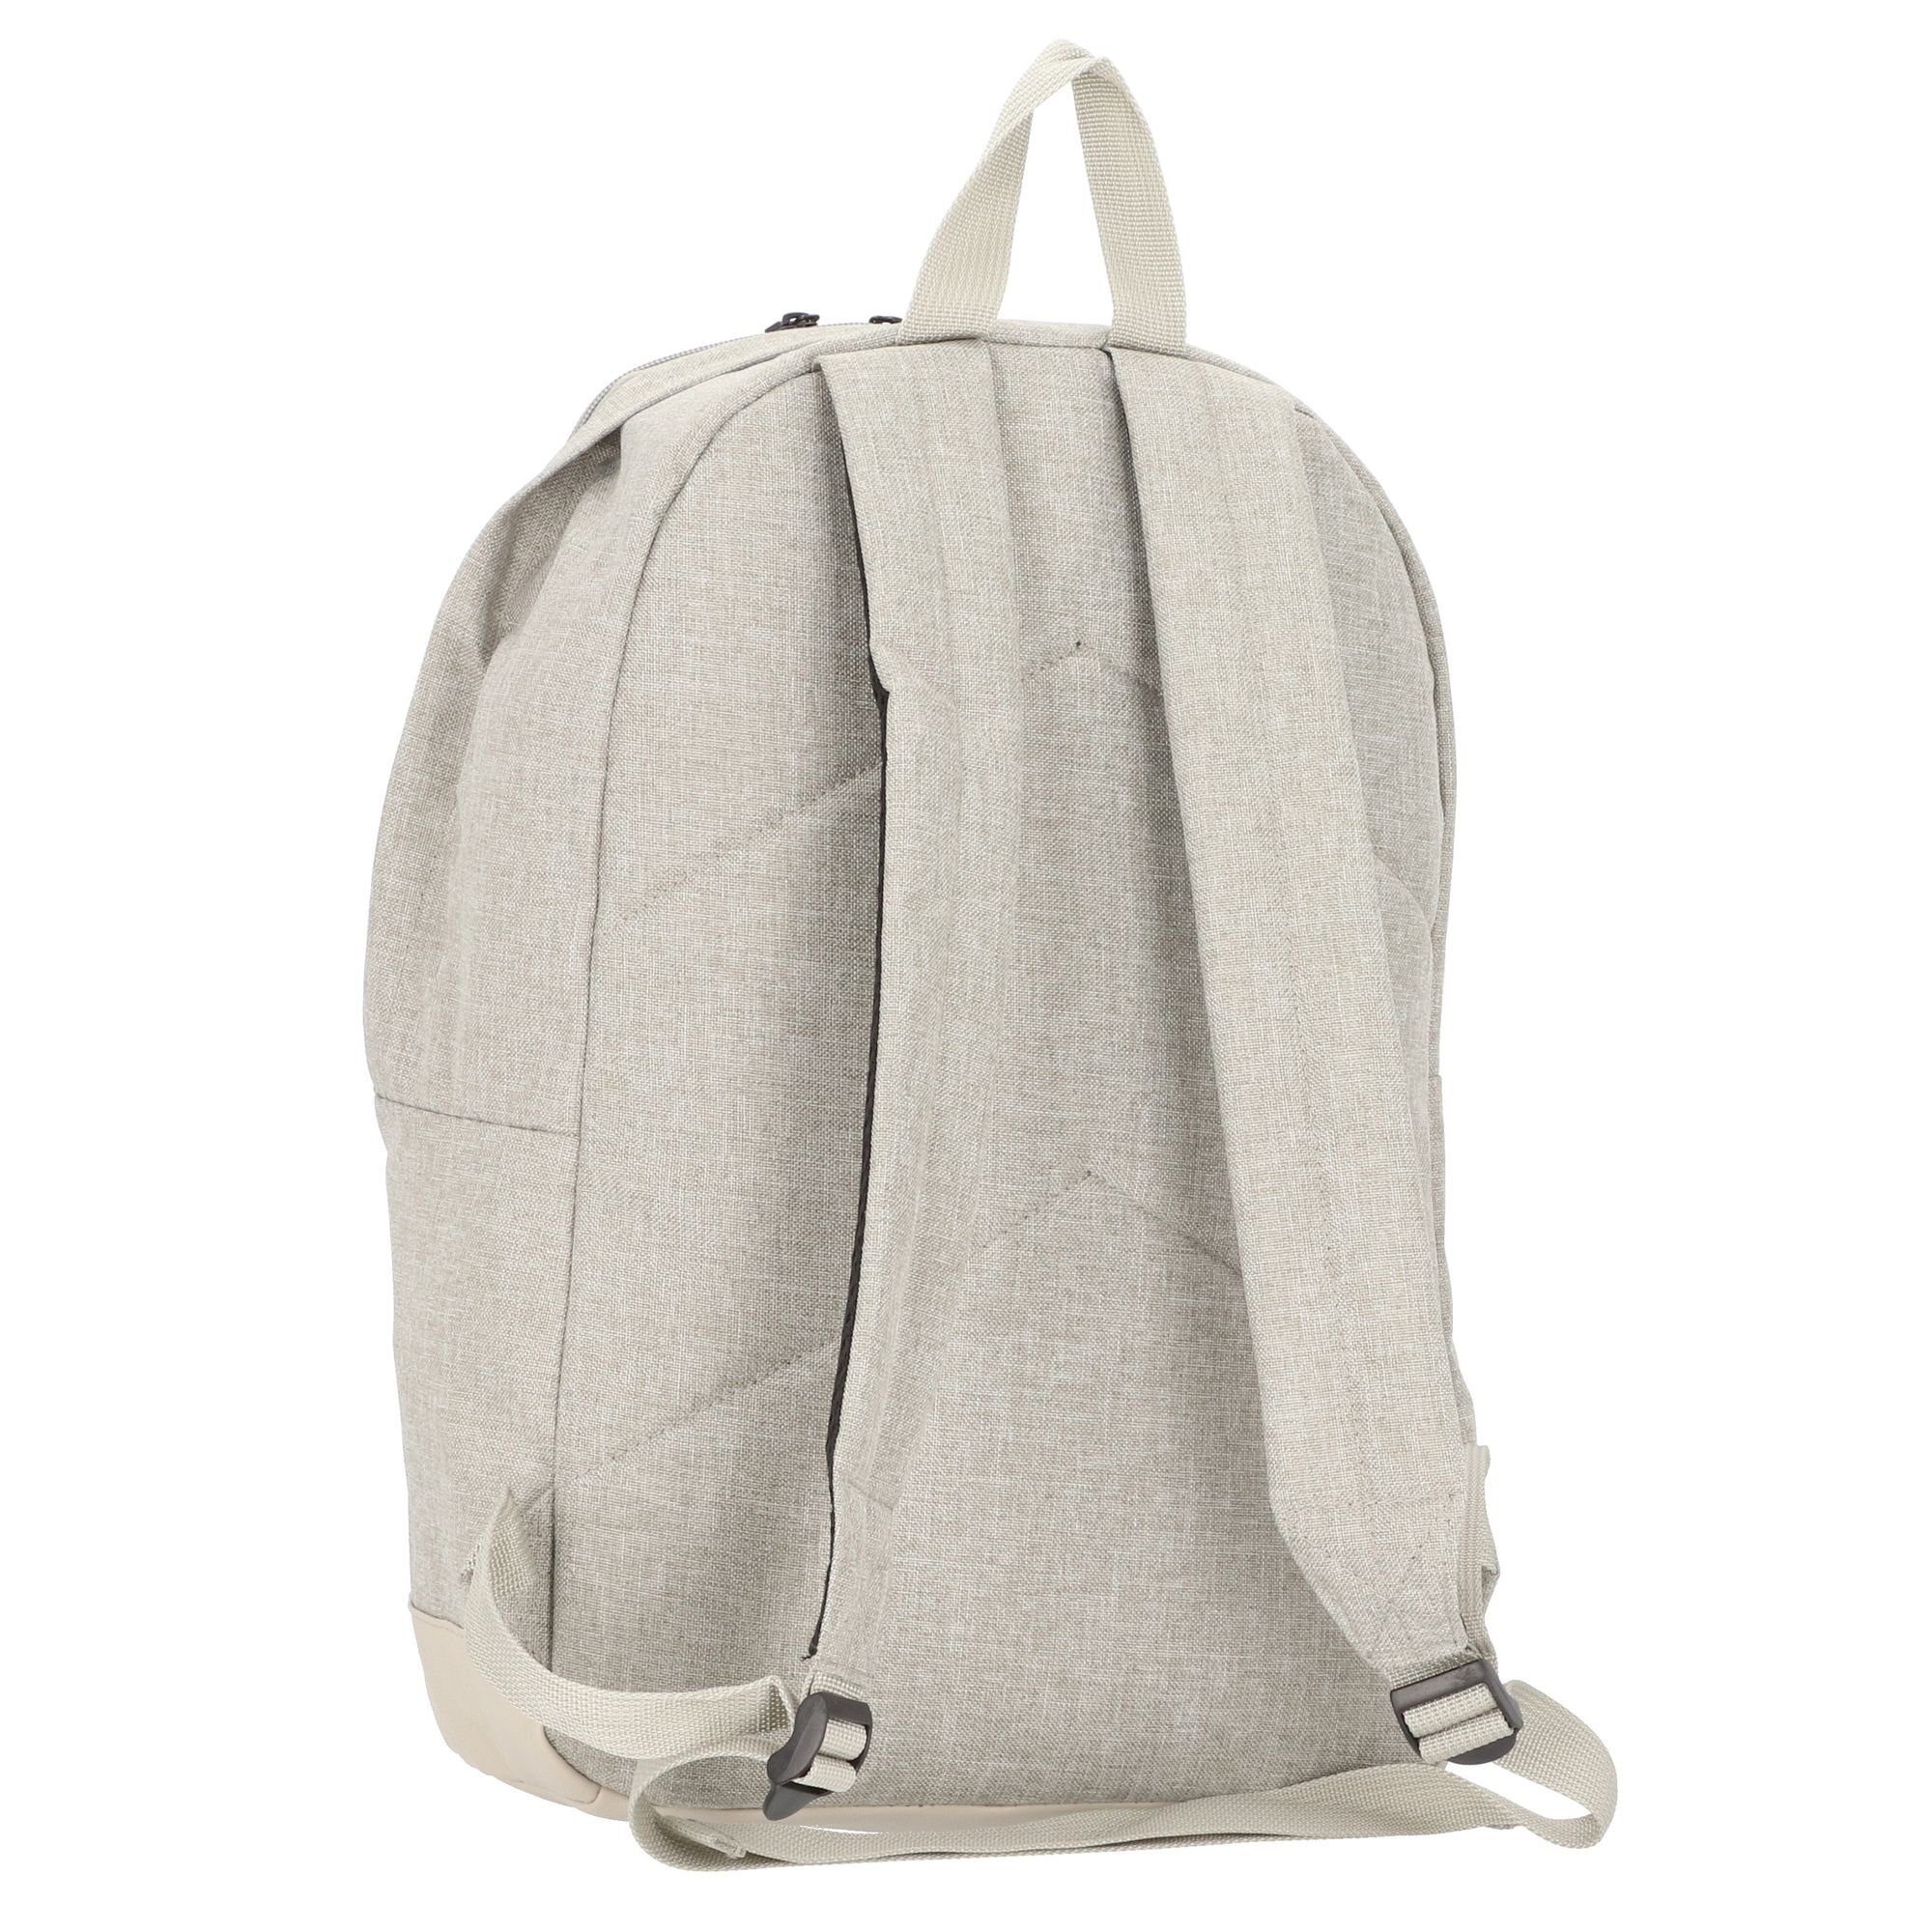 Bench. Daypack classic, hellgrau Polyester